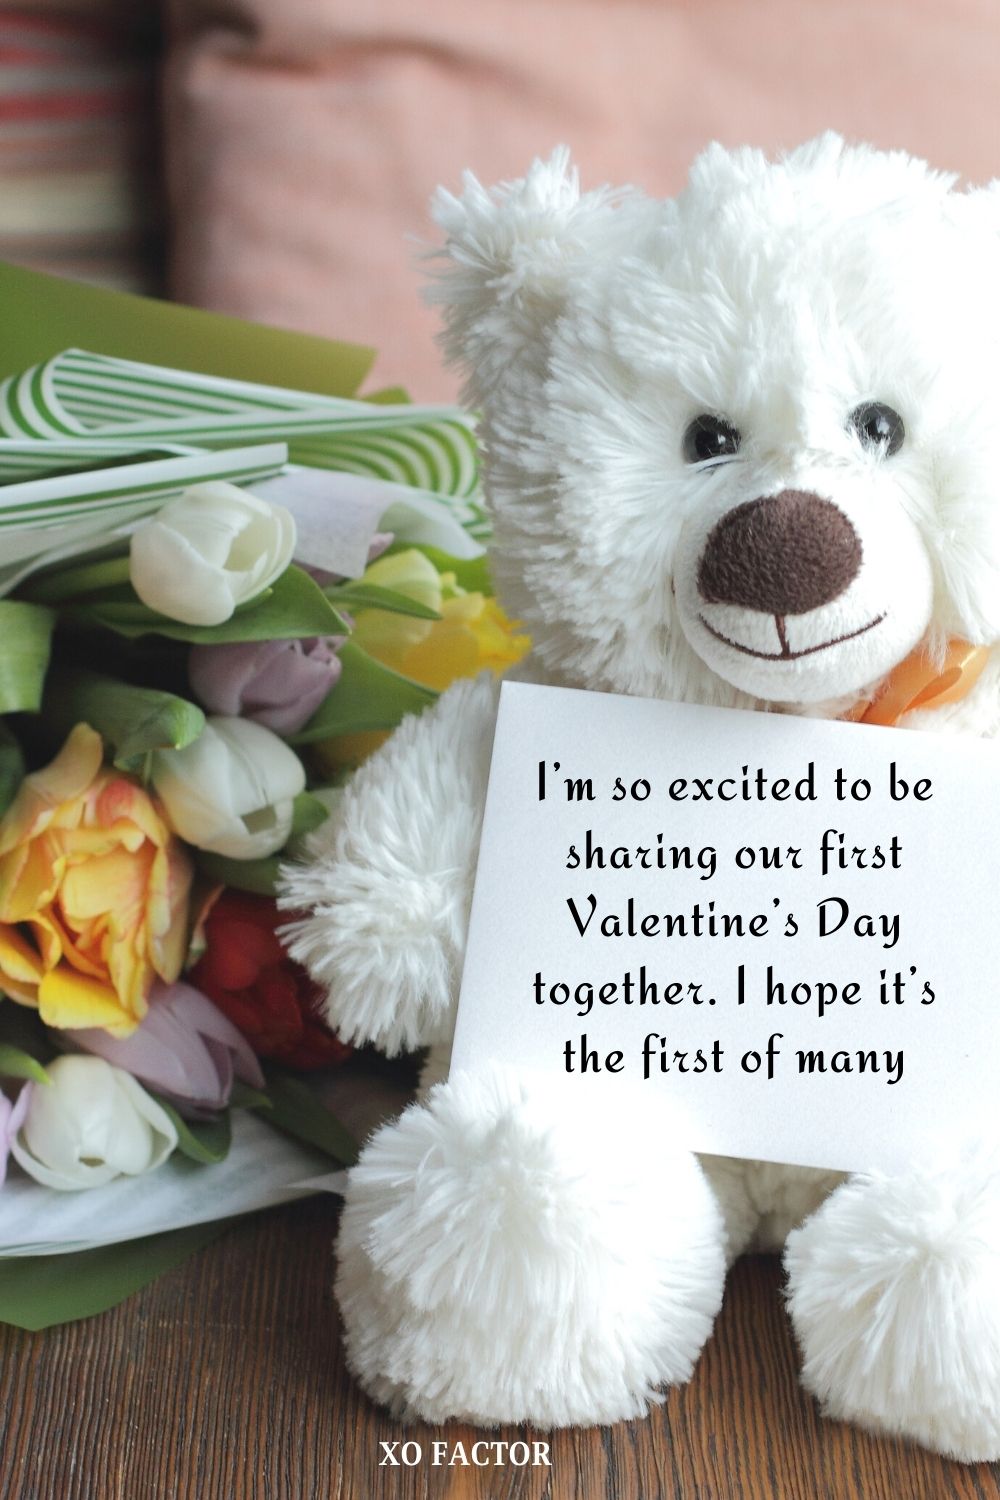 I’m so excited to be sharing our first Valentine’s Day together. I hope it’s the first of many